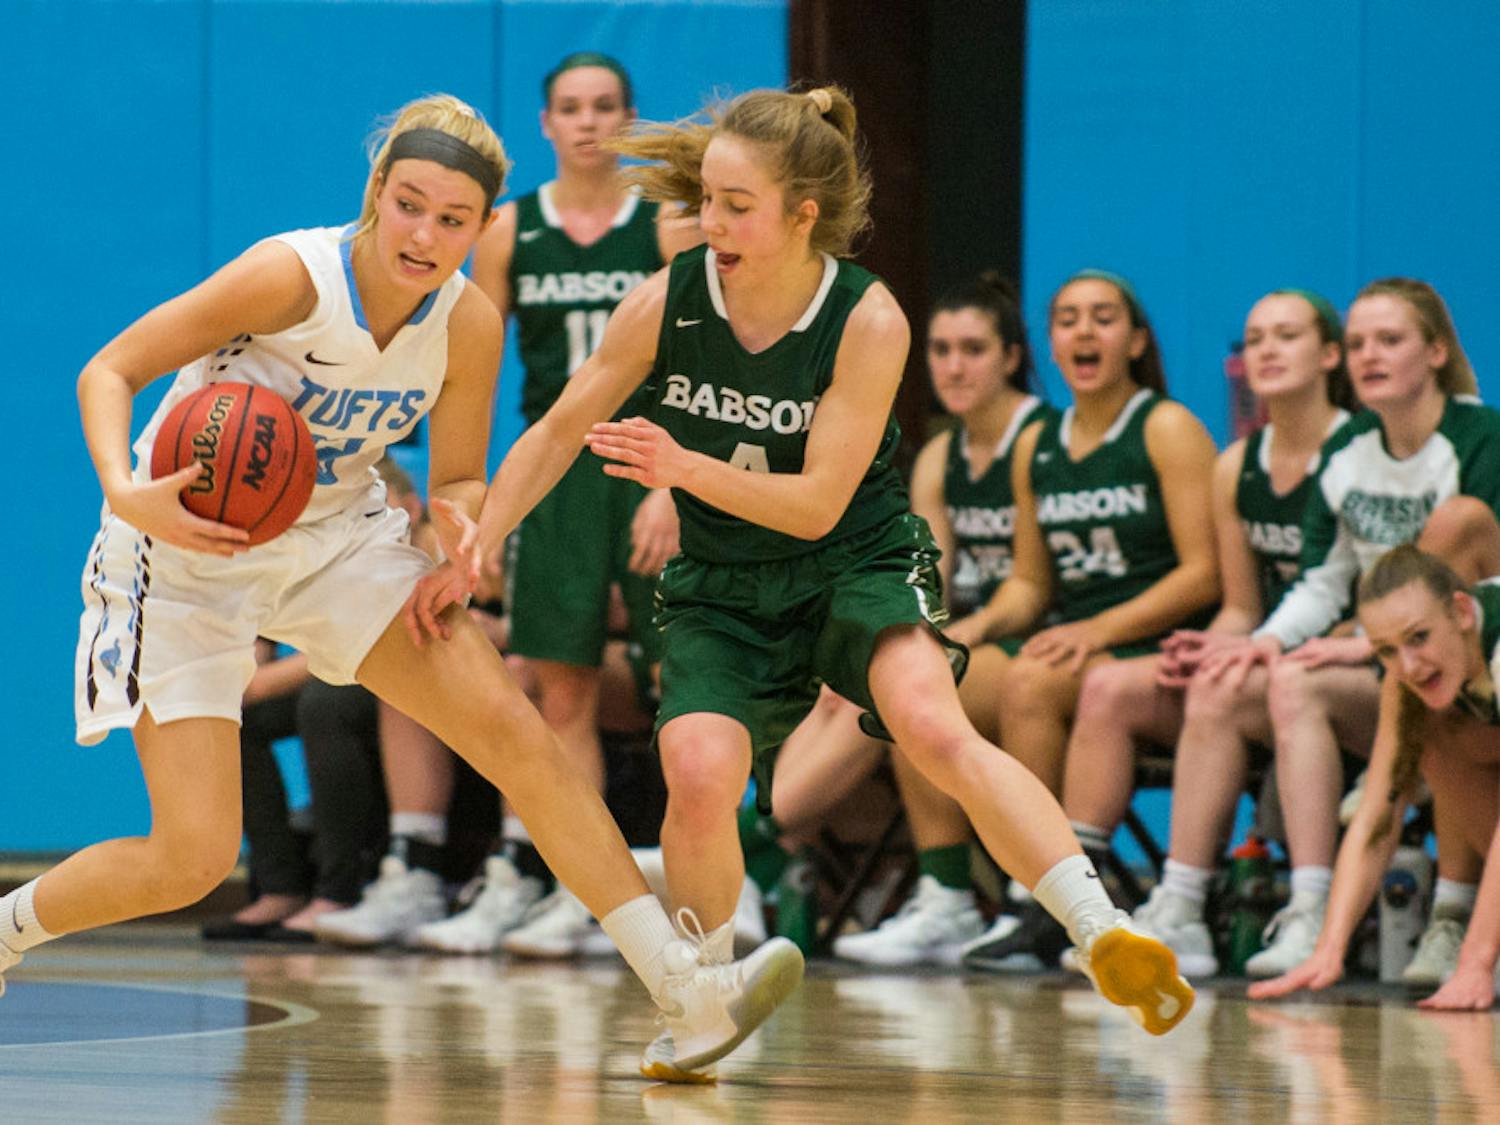 2018-01-29-Tufts-Womens-Basketball-v-Babson-RBE-027